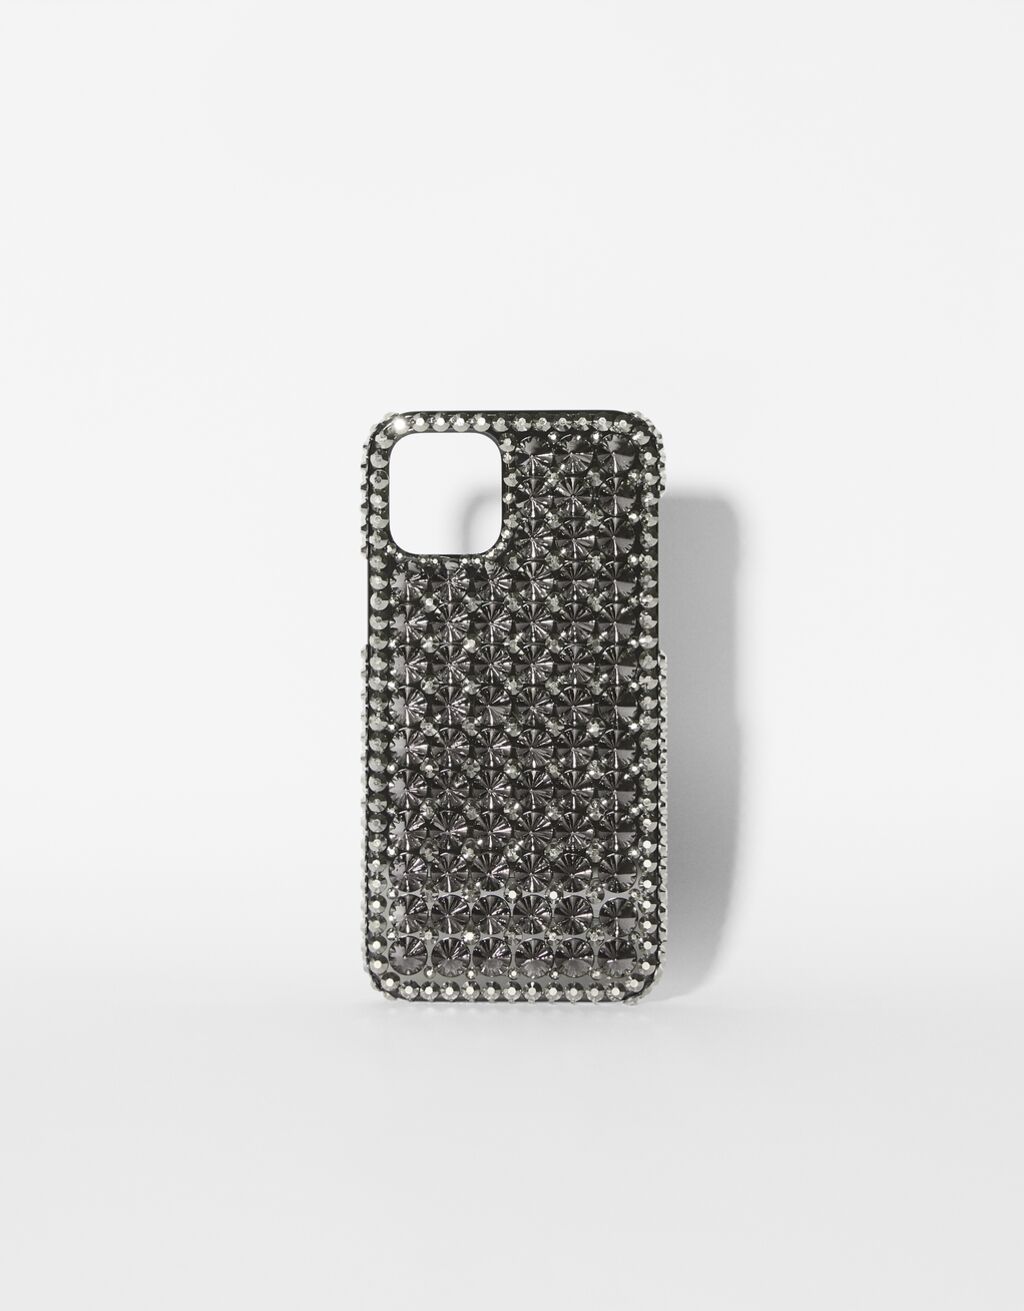 Cell phone case embellished with rhinestone spikes